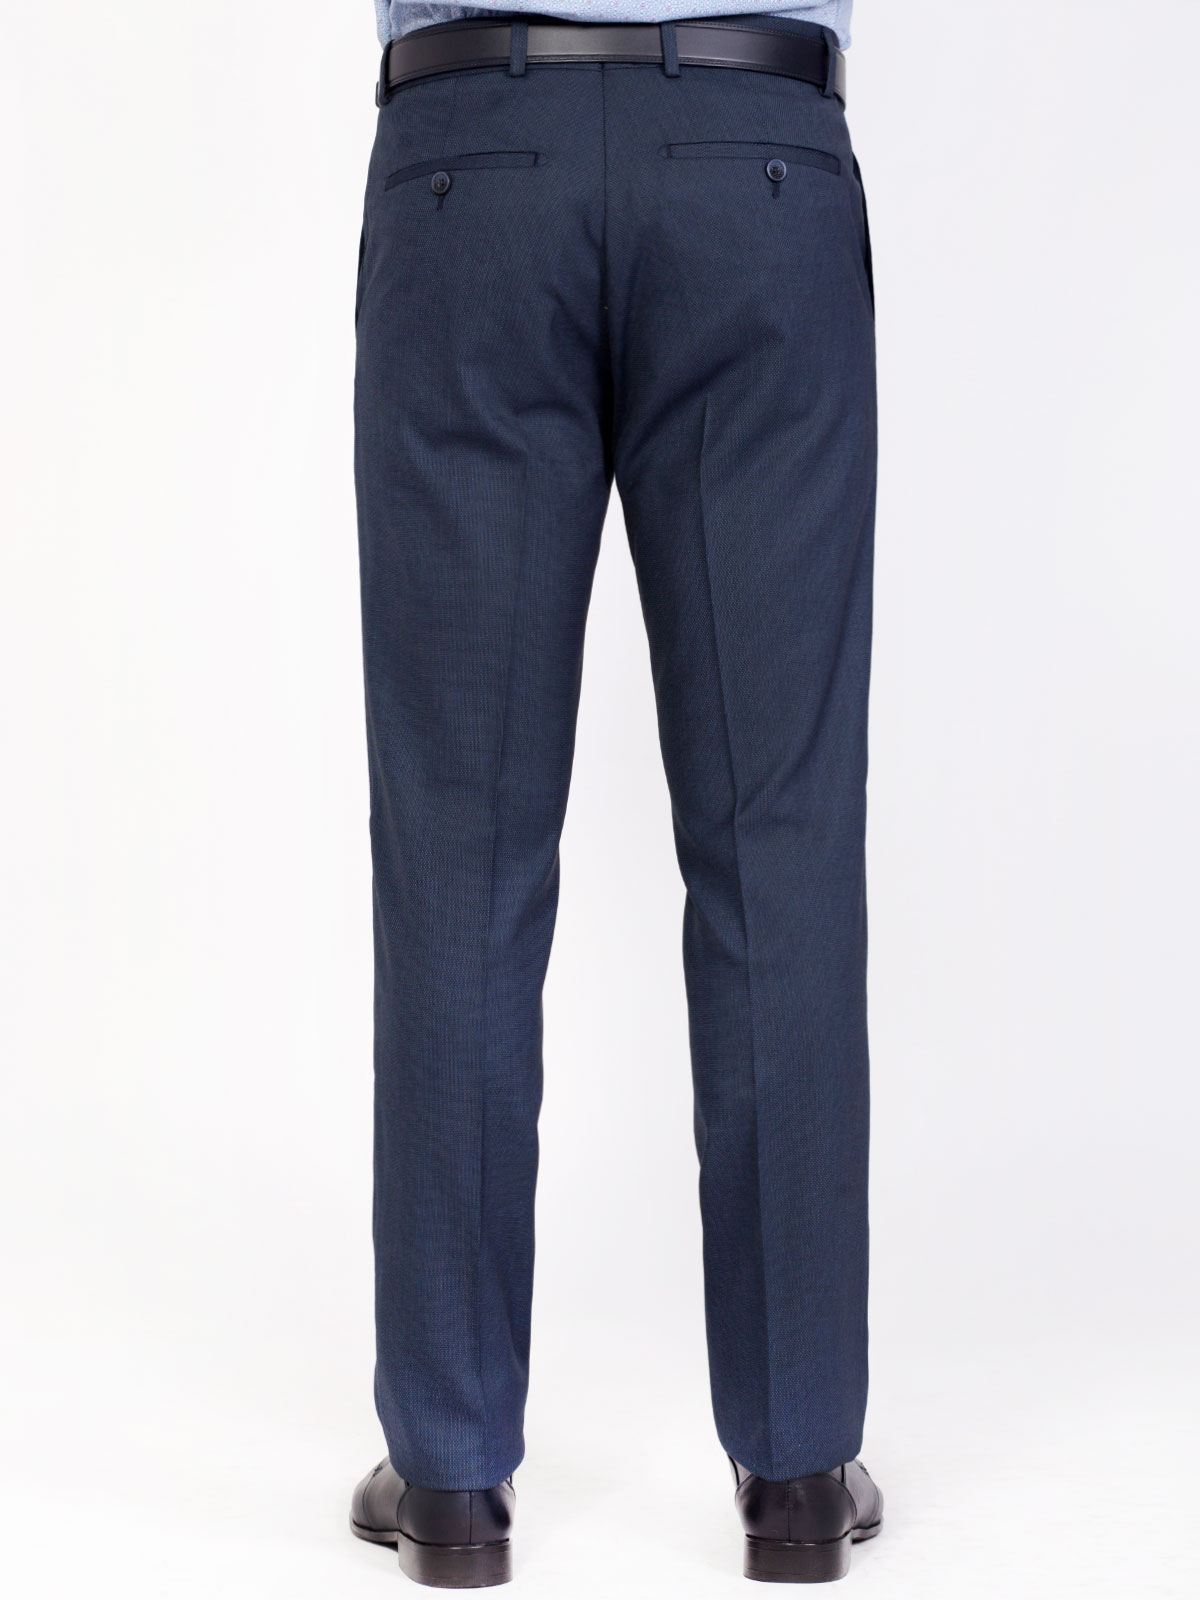  classic small cage pants  - 63201 € 38.81 img3